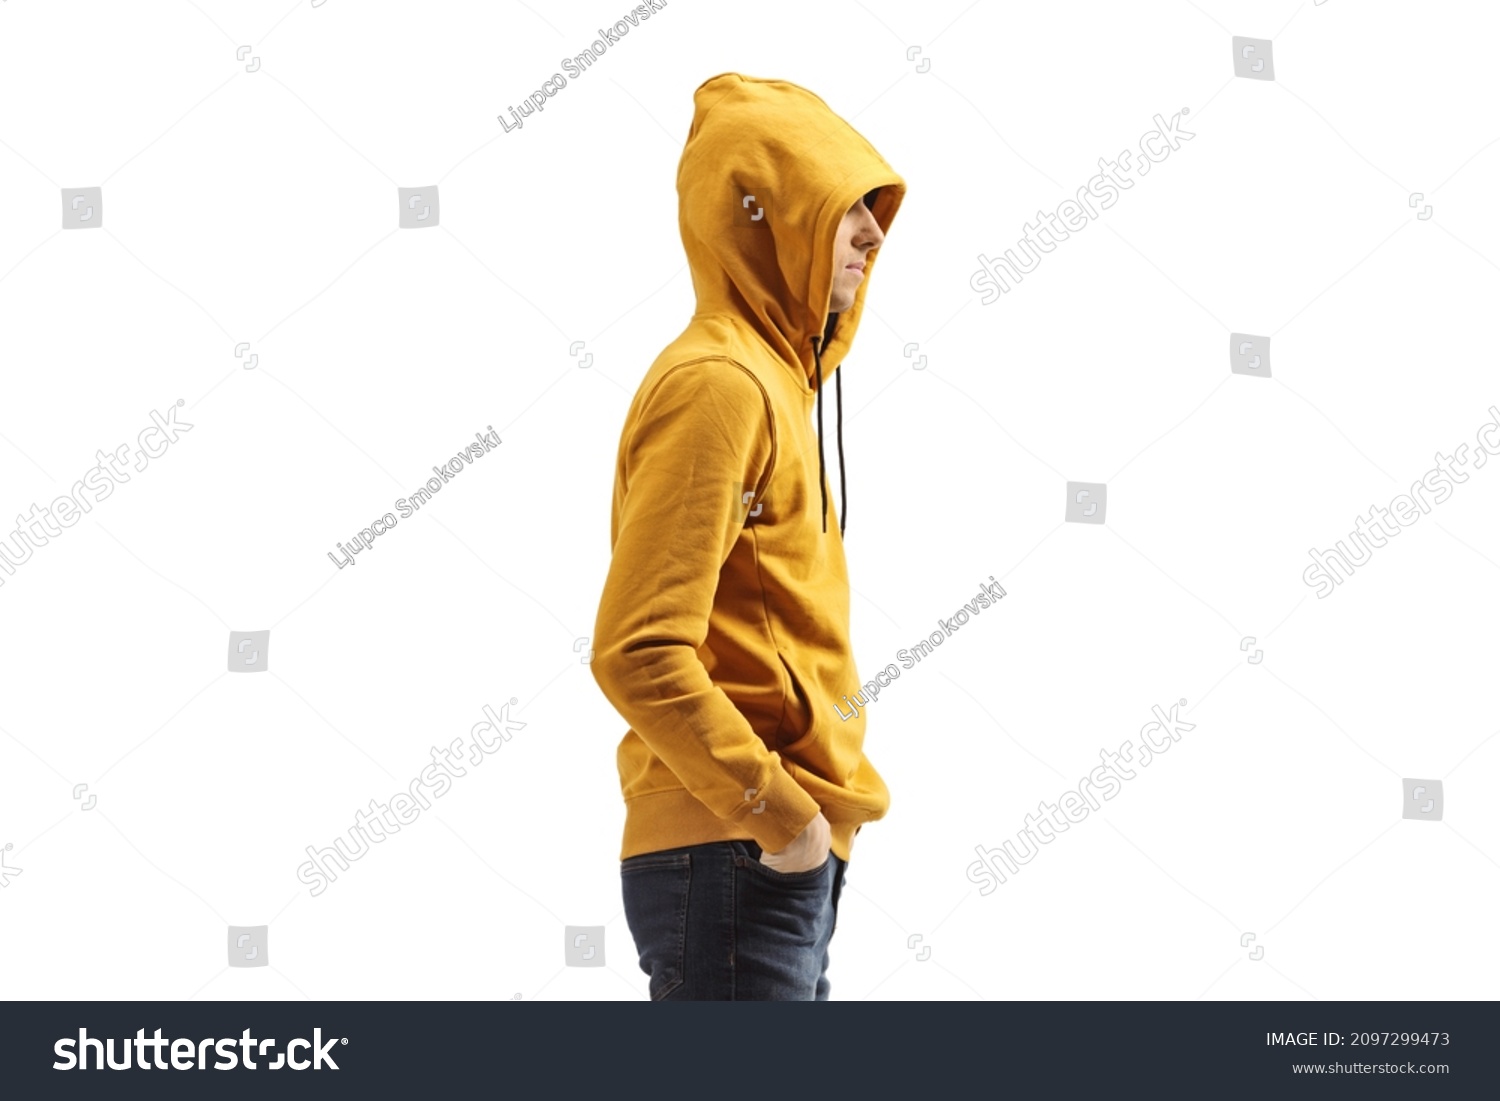 3,838 Hood profile Stock Photos, Images & Photography | Shutterstock